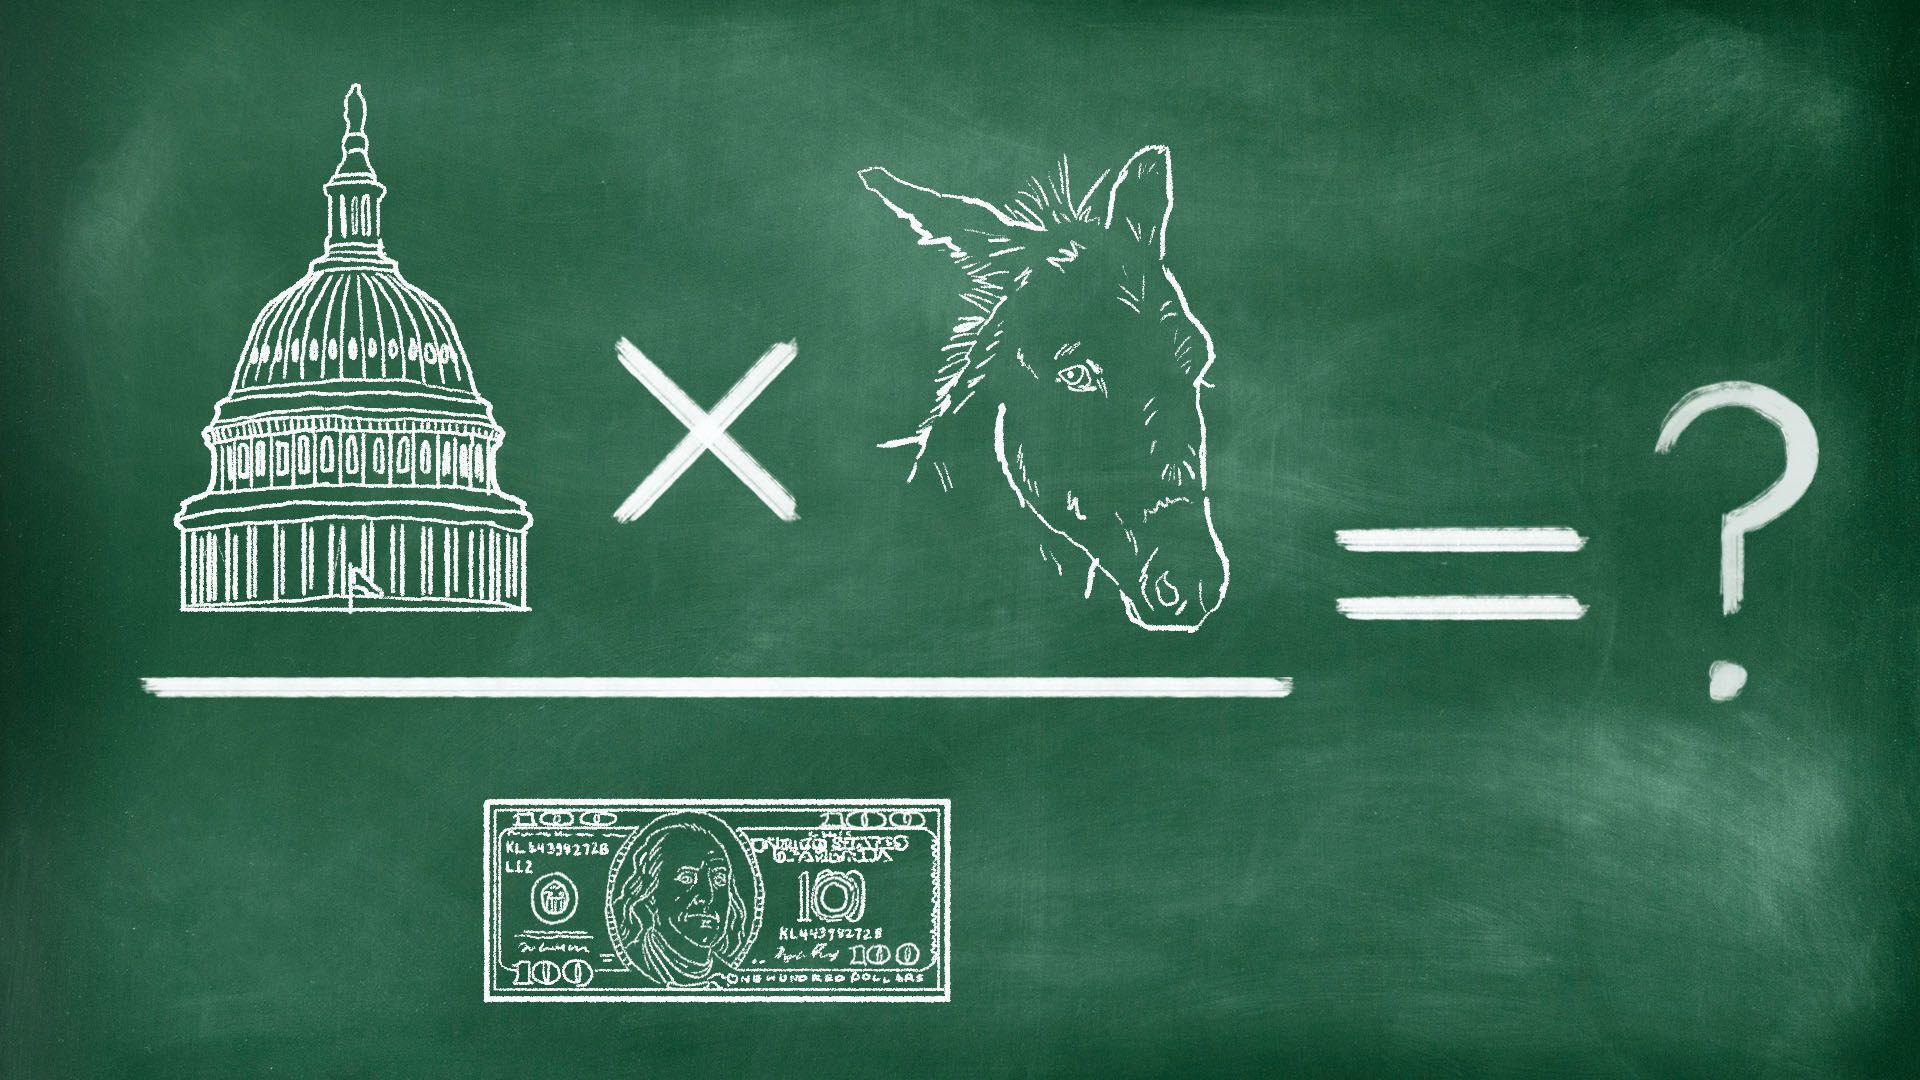 Illustration of a chalkboard with a math equation featuring the capitol dome, a donkey, and a hundred dollar bill